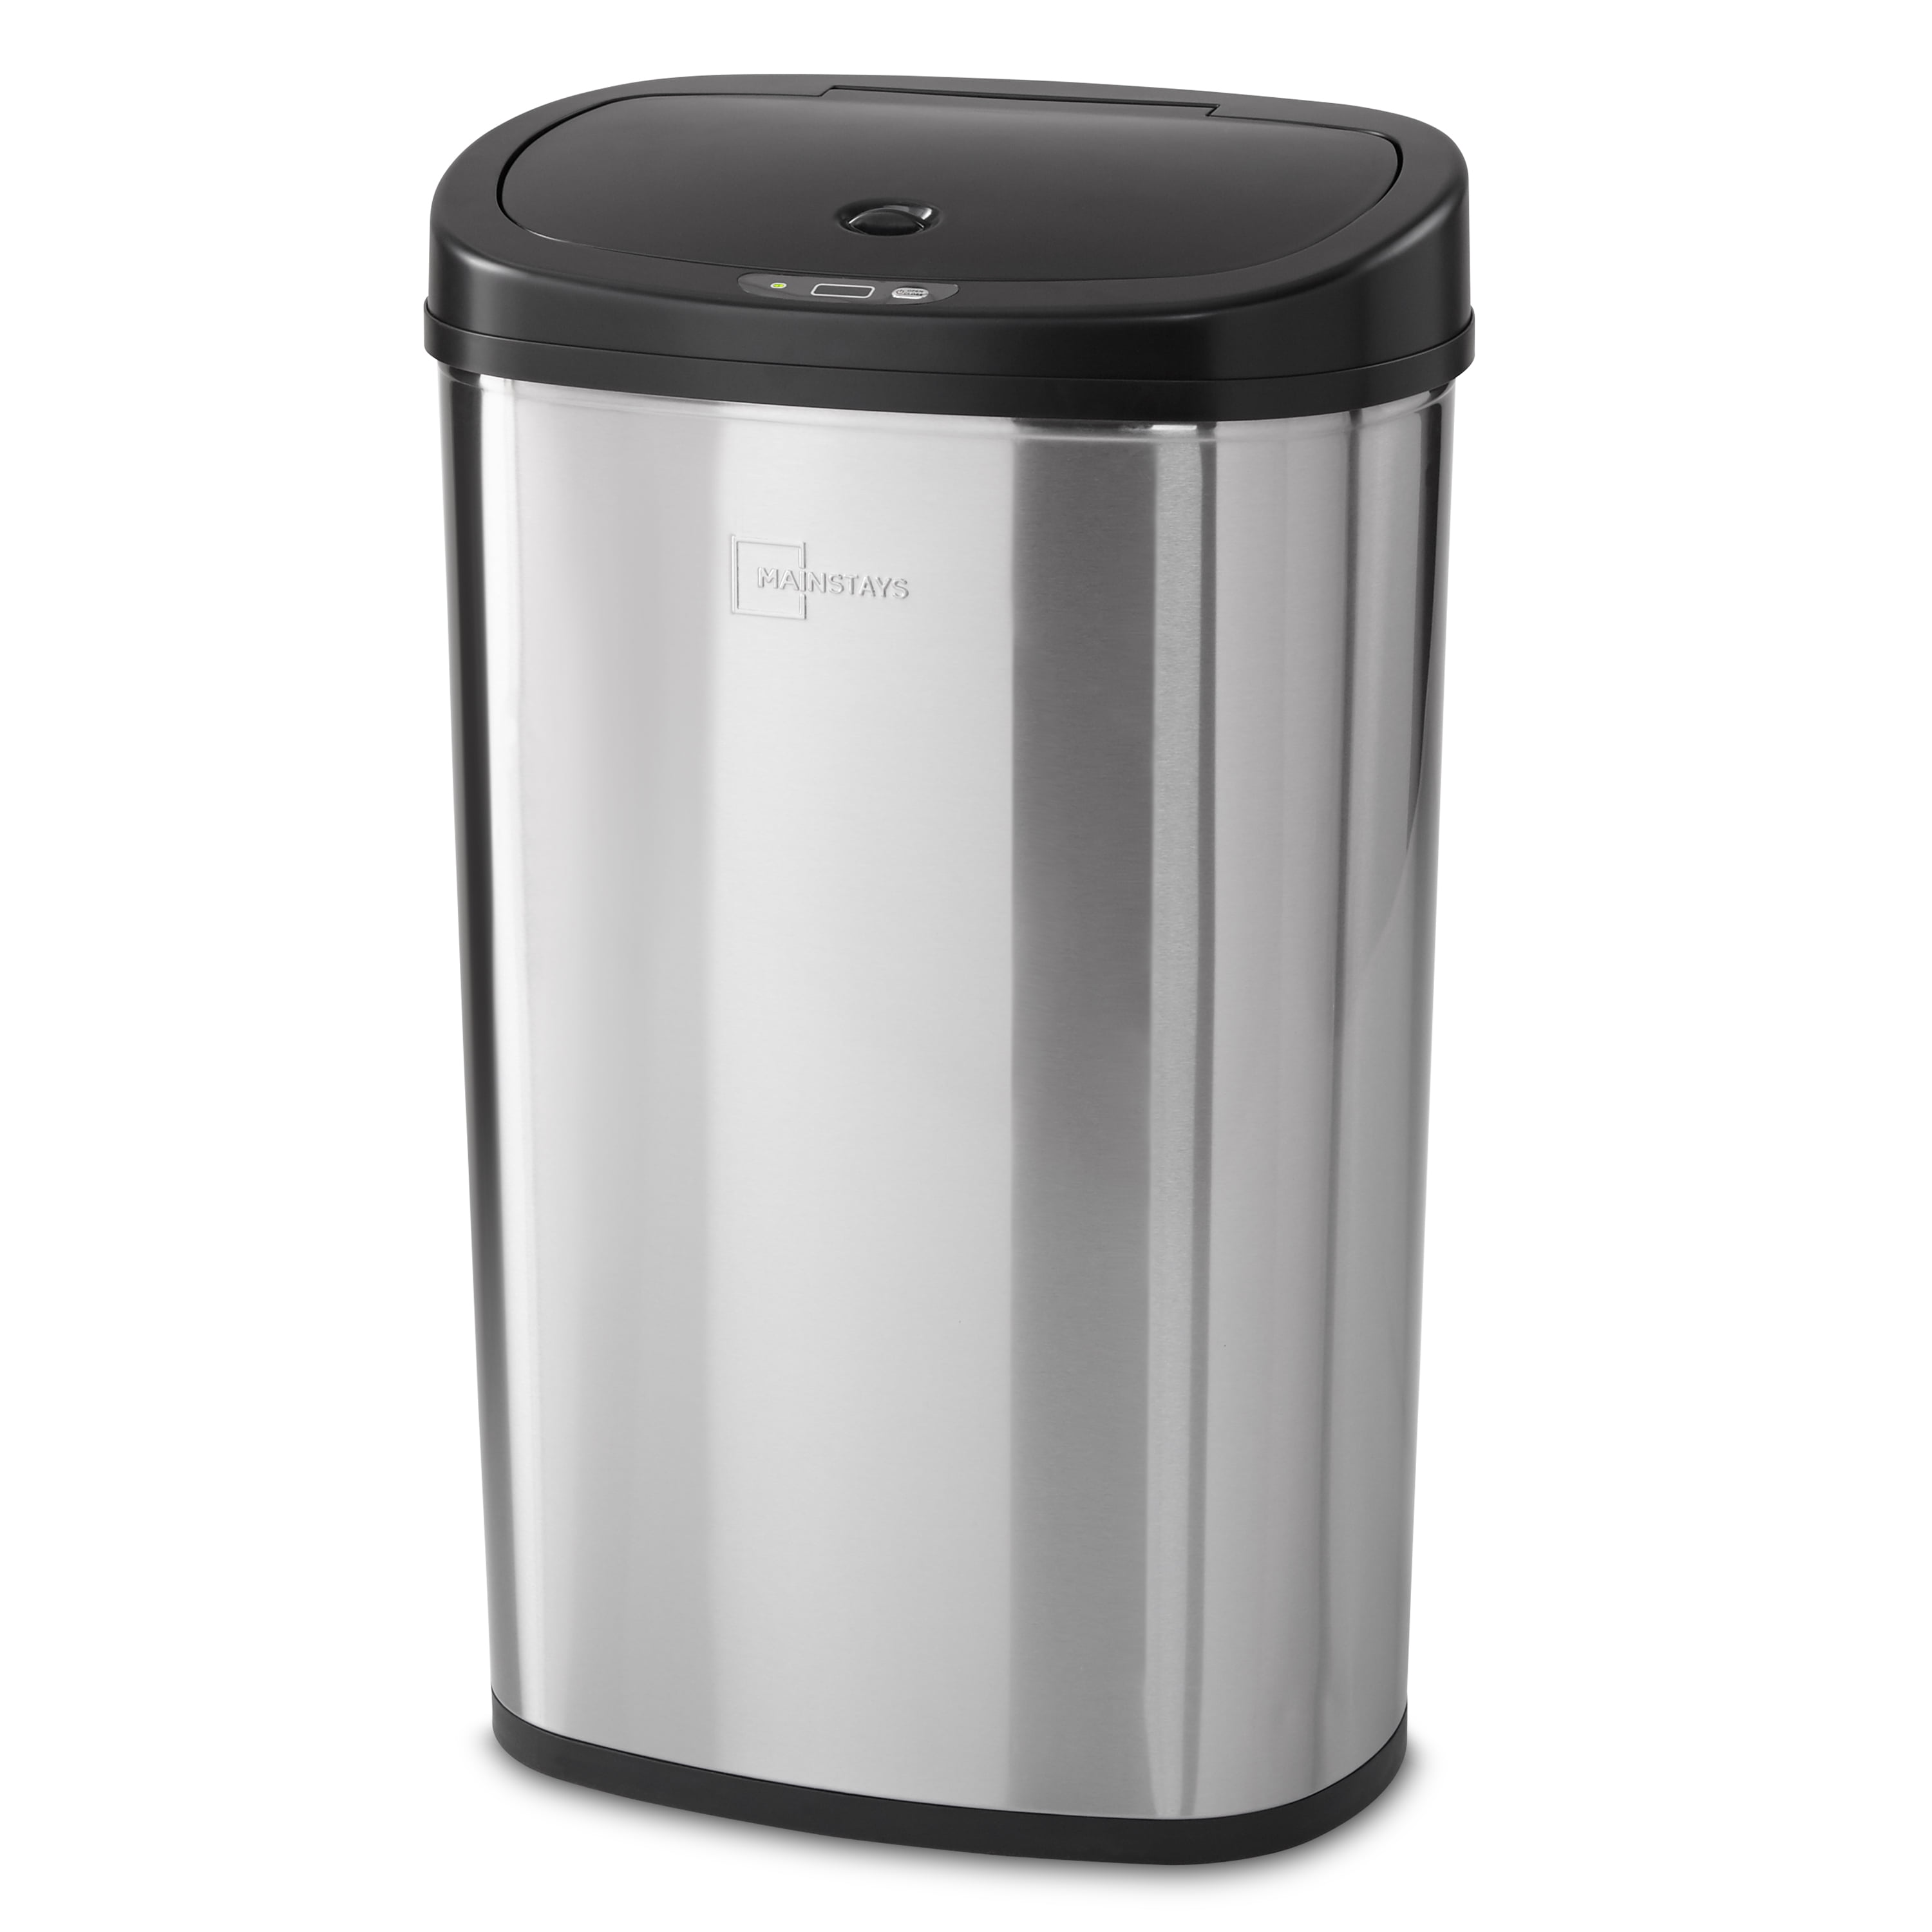 Mainstays Motion Sensor Trash Can 13.2 Gallon Stainless Steel